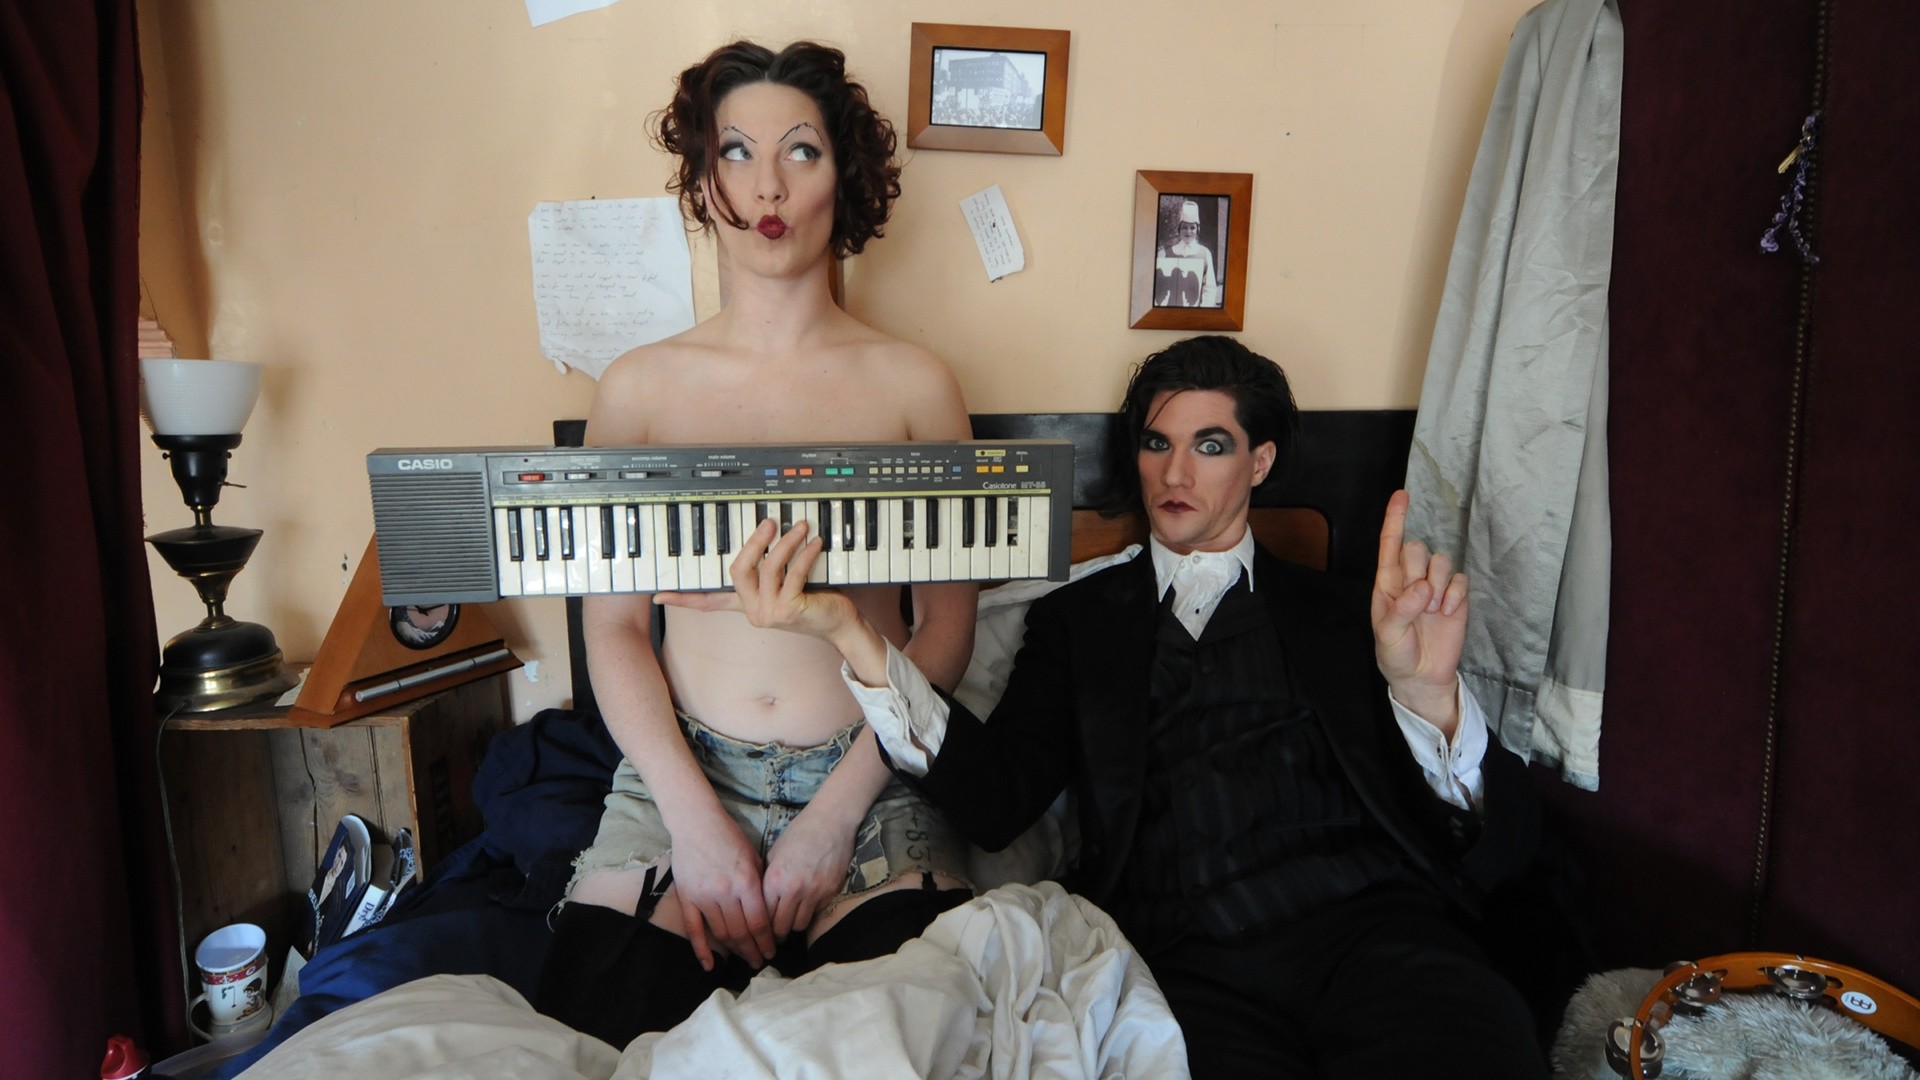 1920x1080 ... girl, synthesizer news, pictures and videos and learn all about the  dresden dolls, girl, synthesizer from wallpapers4u.org, your wallpaper news  source.